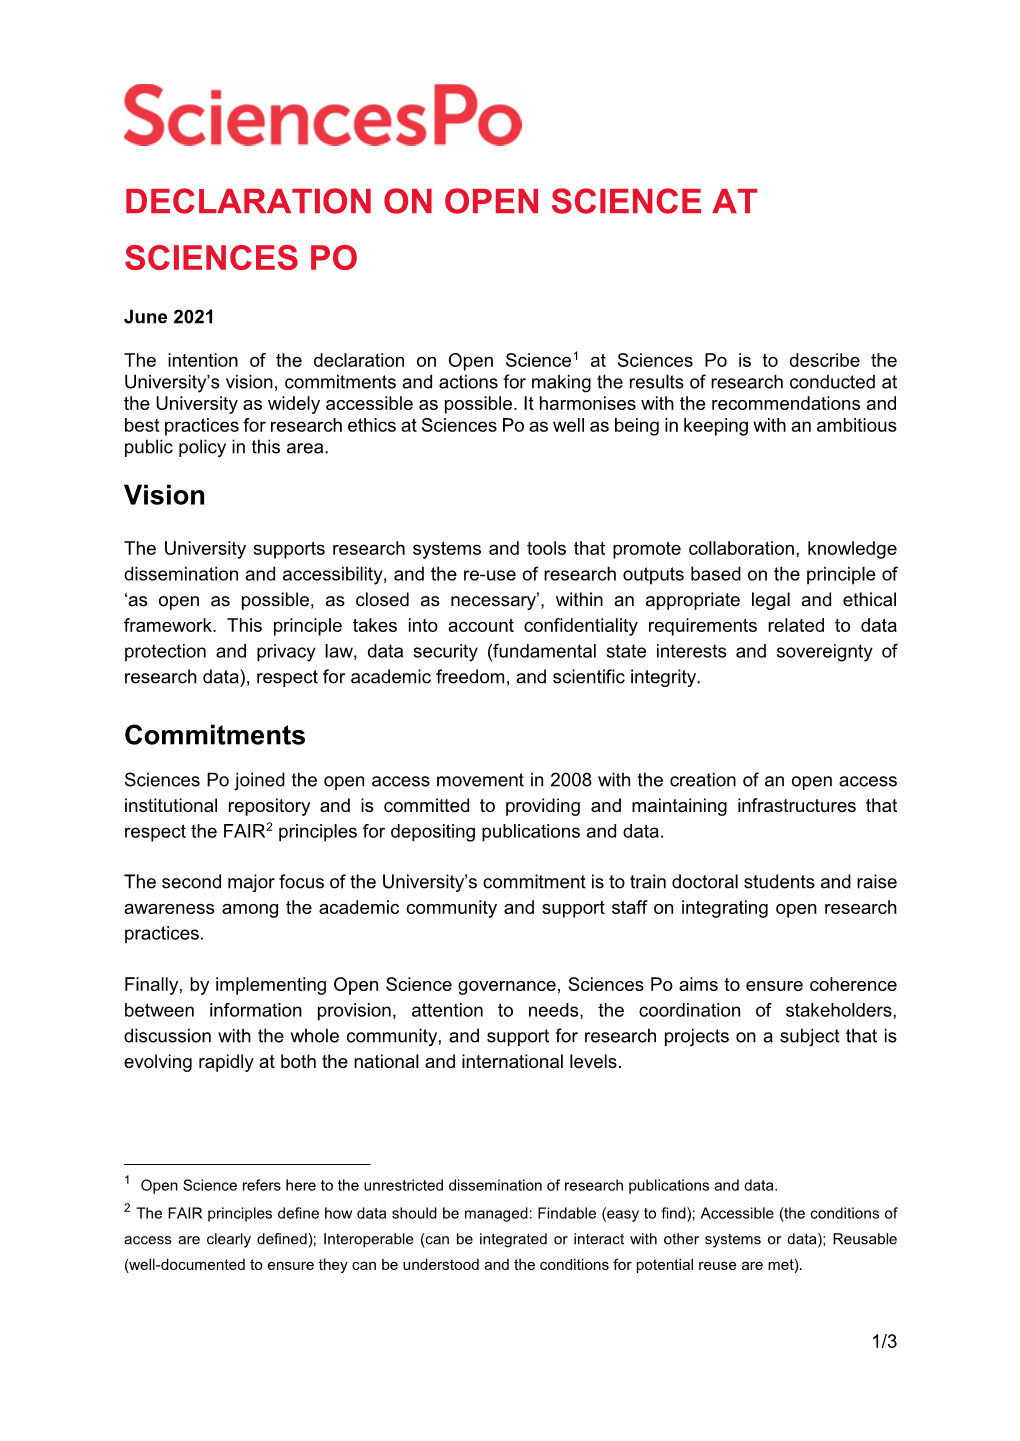 Declaration on Open Science at Sciences Po